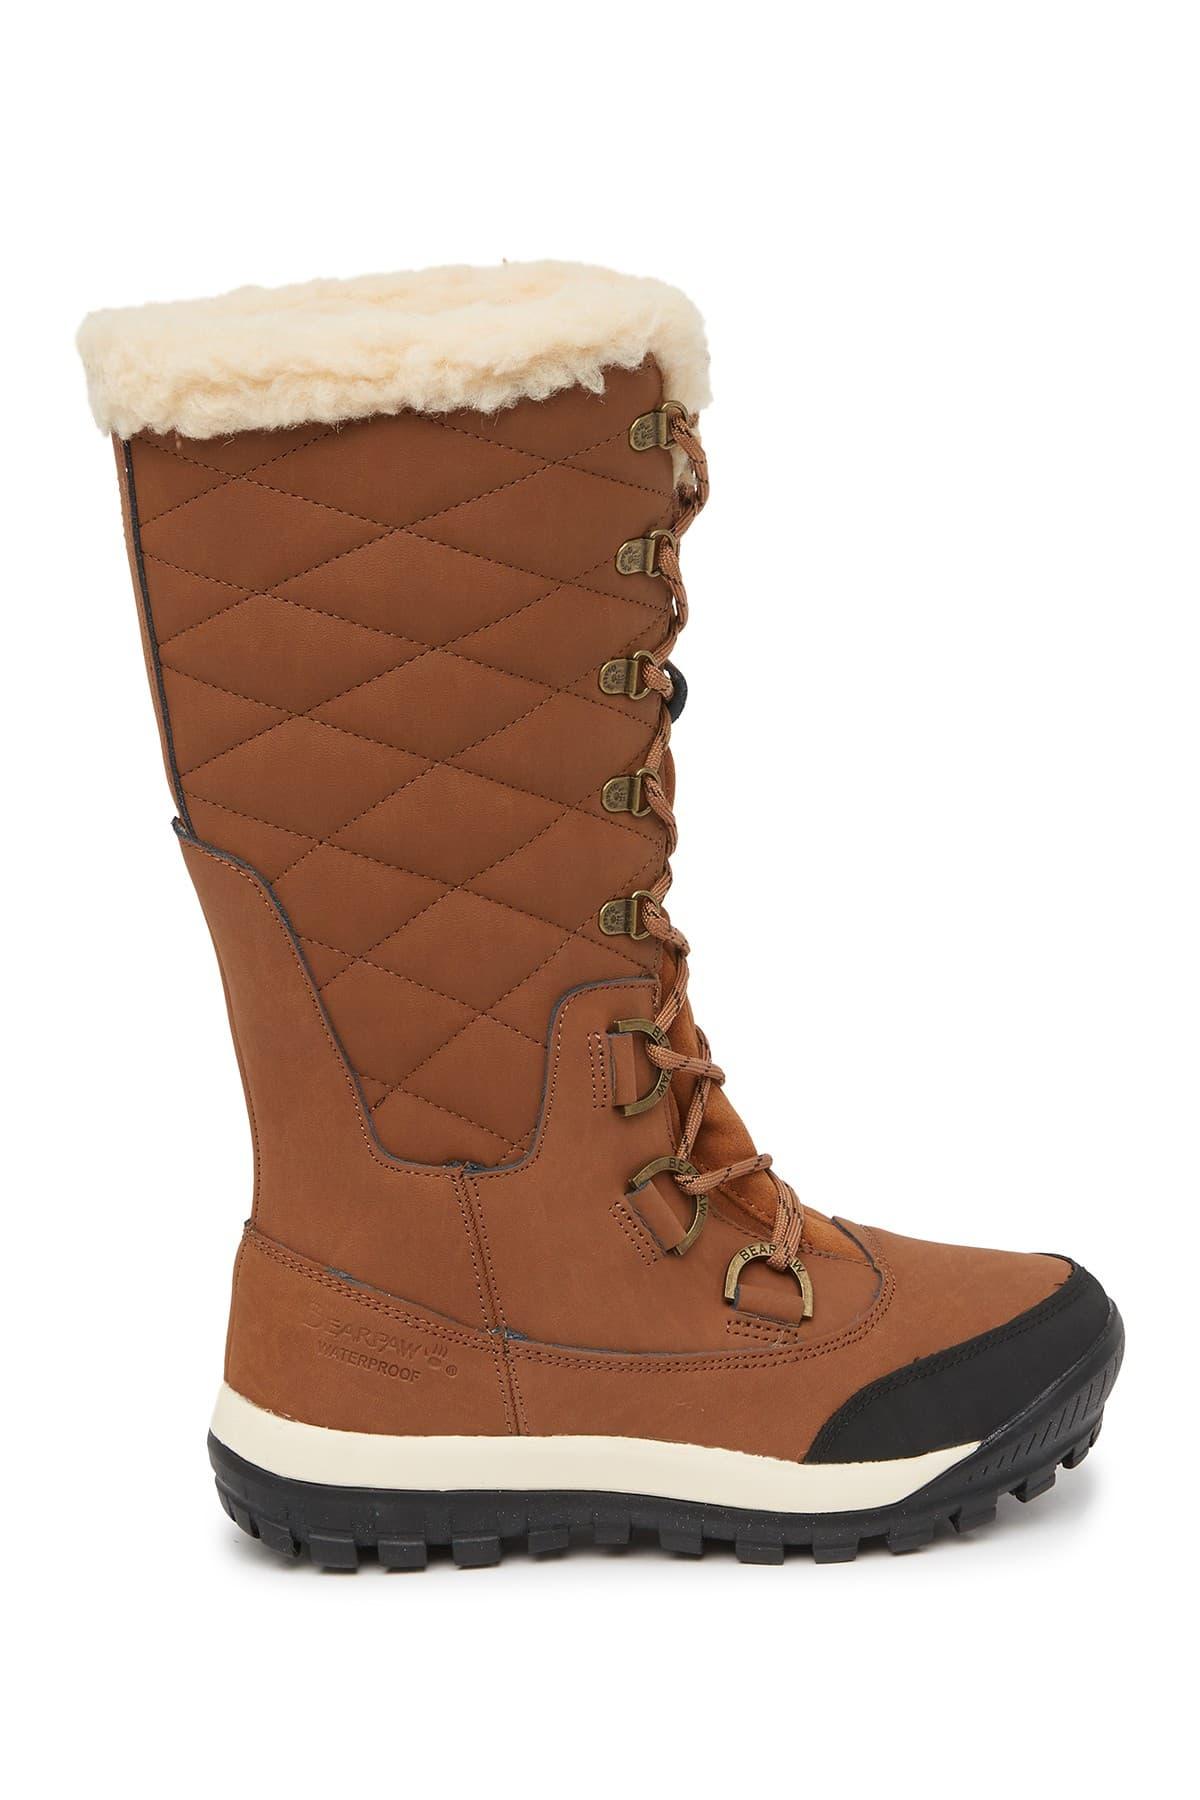 BEARPAW Isabella Genuine Lace-up Boot in Brown -